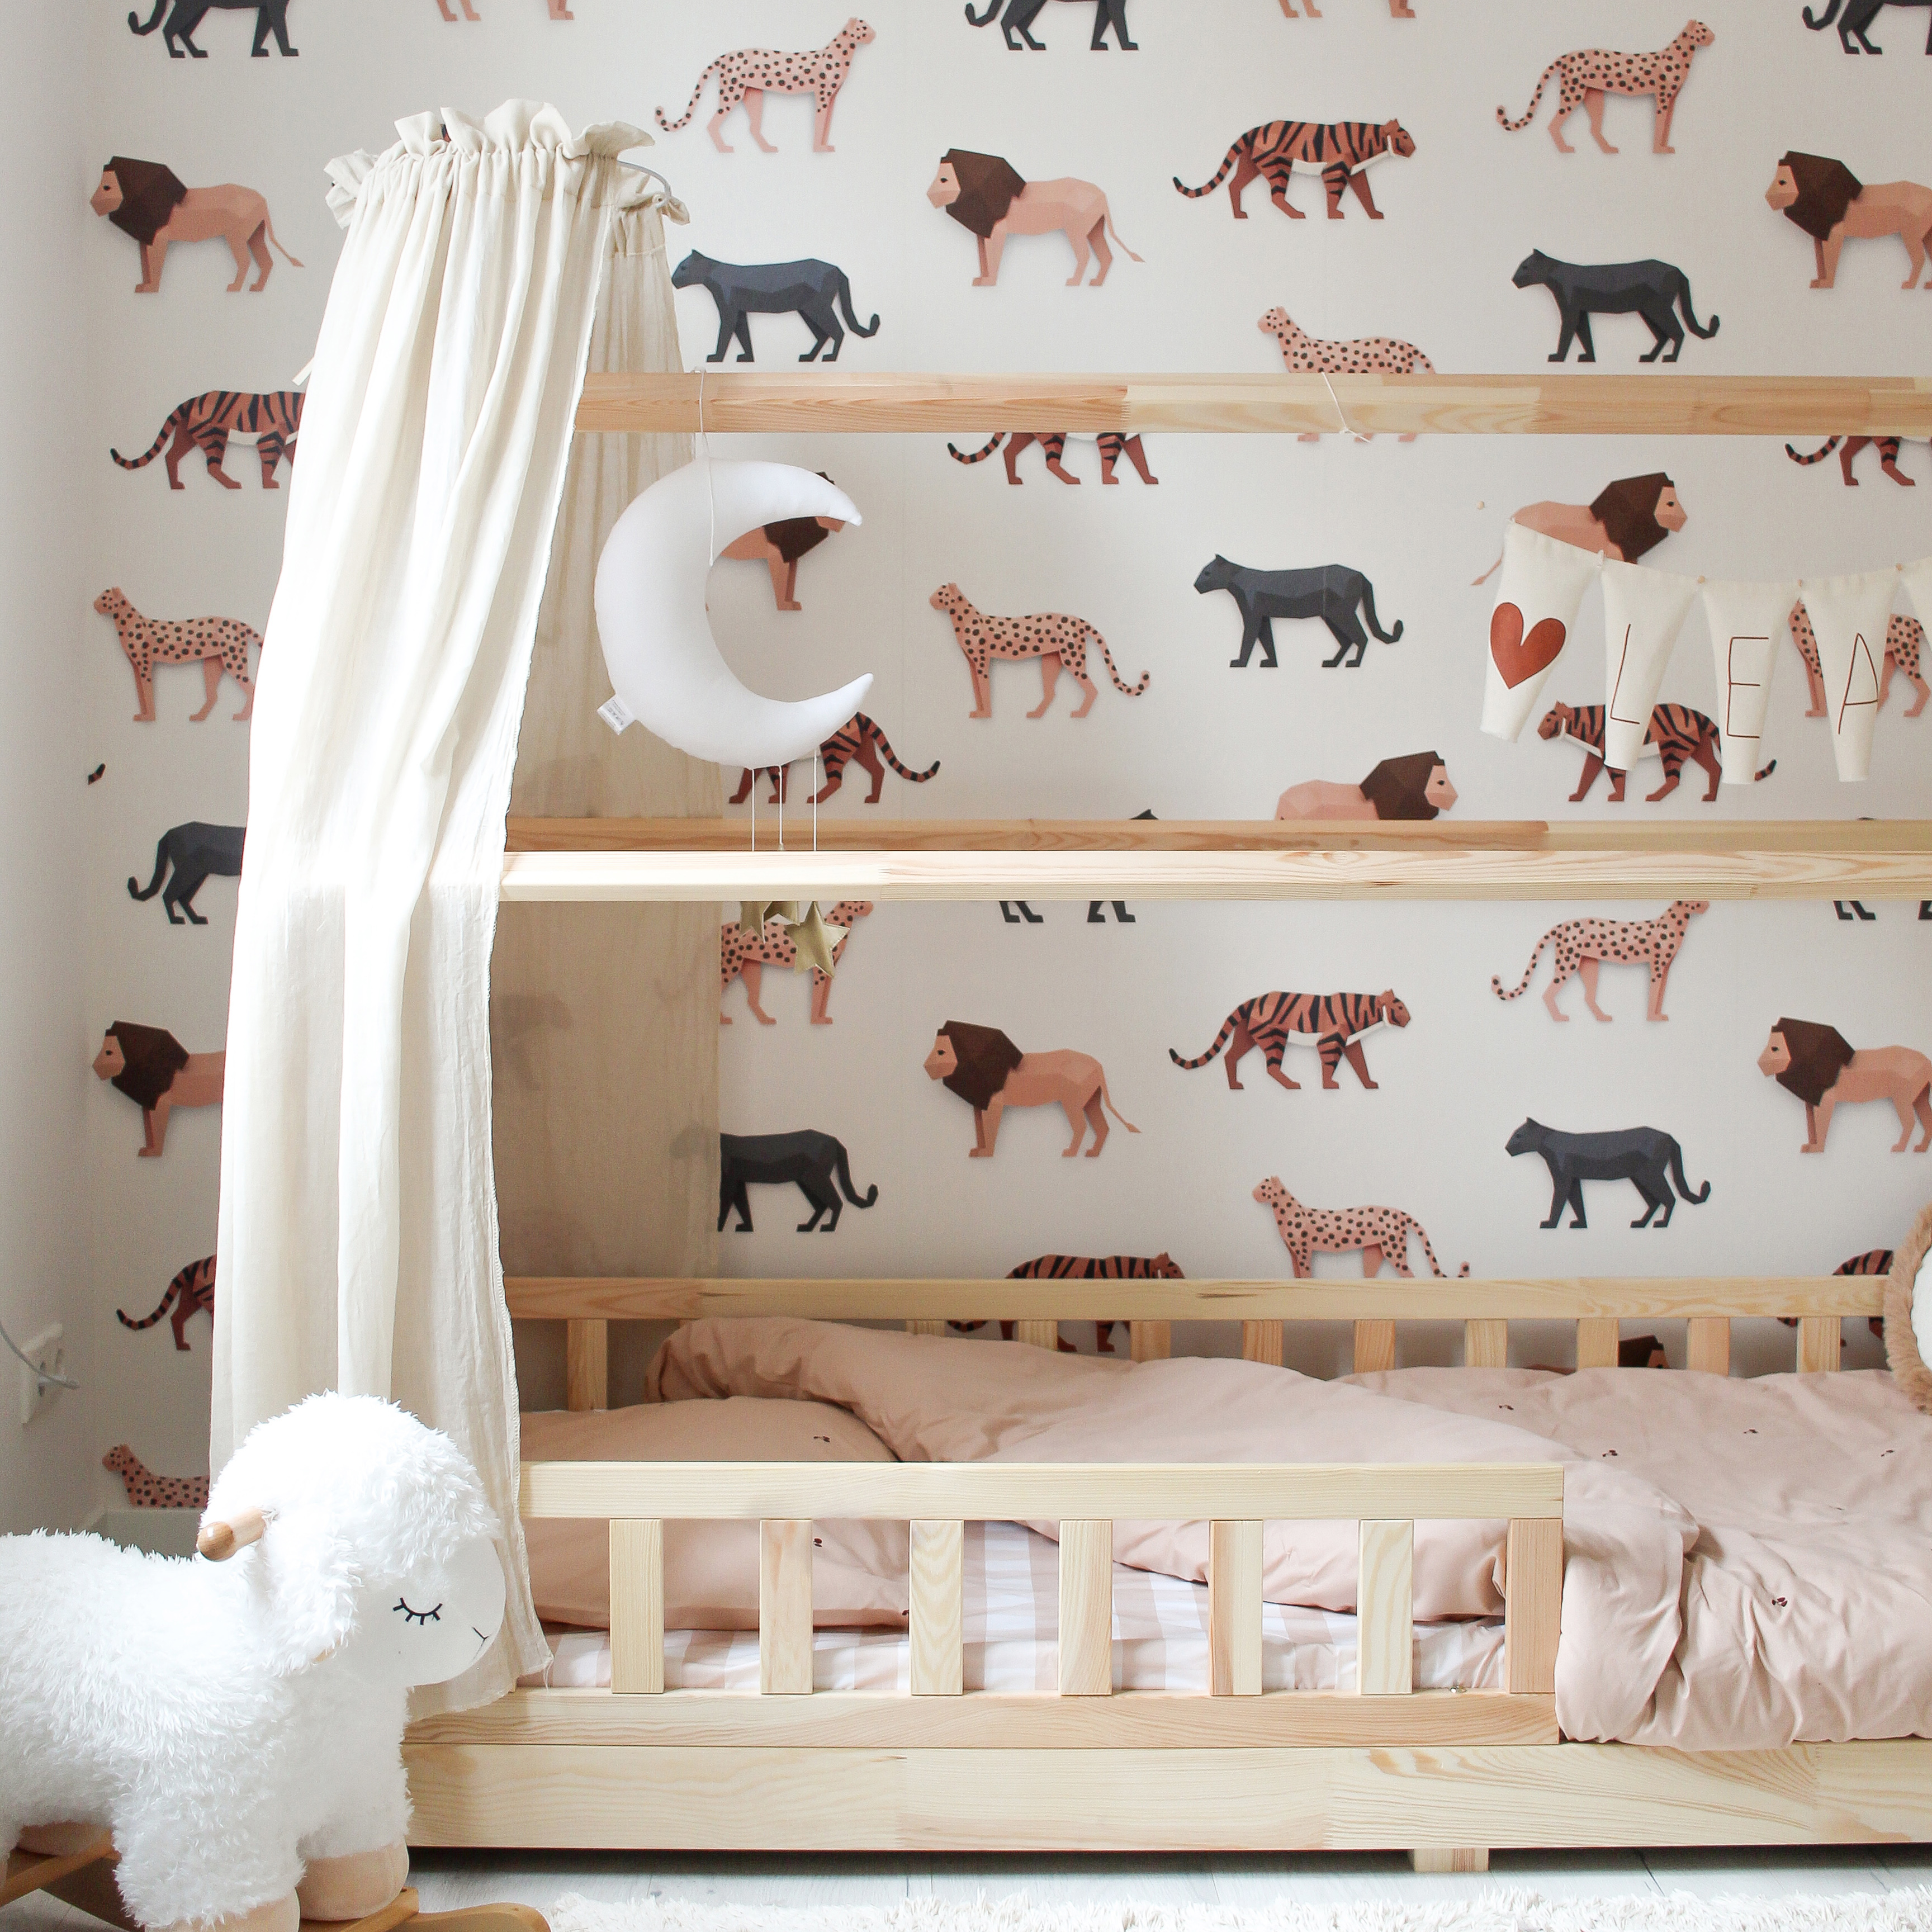 Nursery with big cats wallpaper